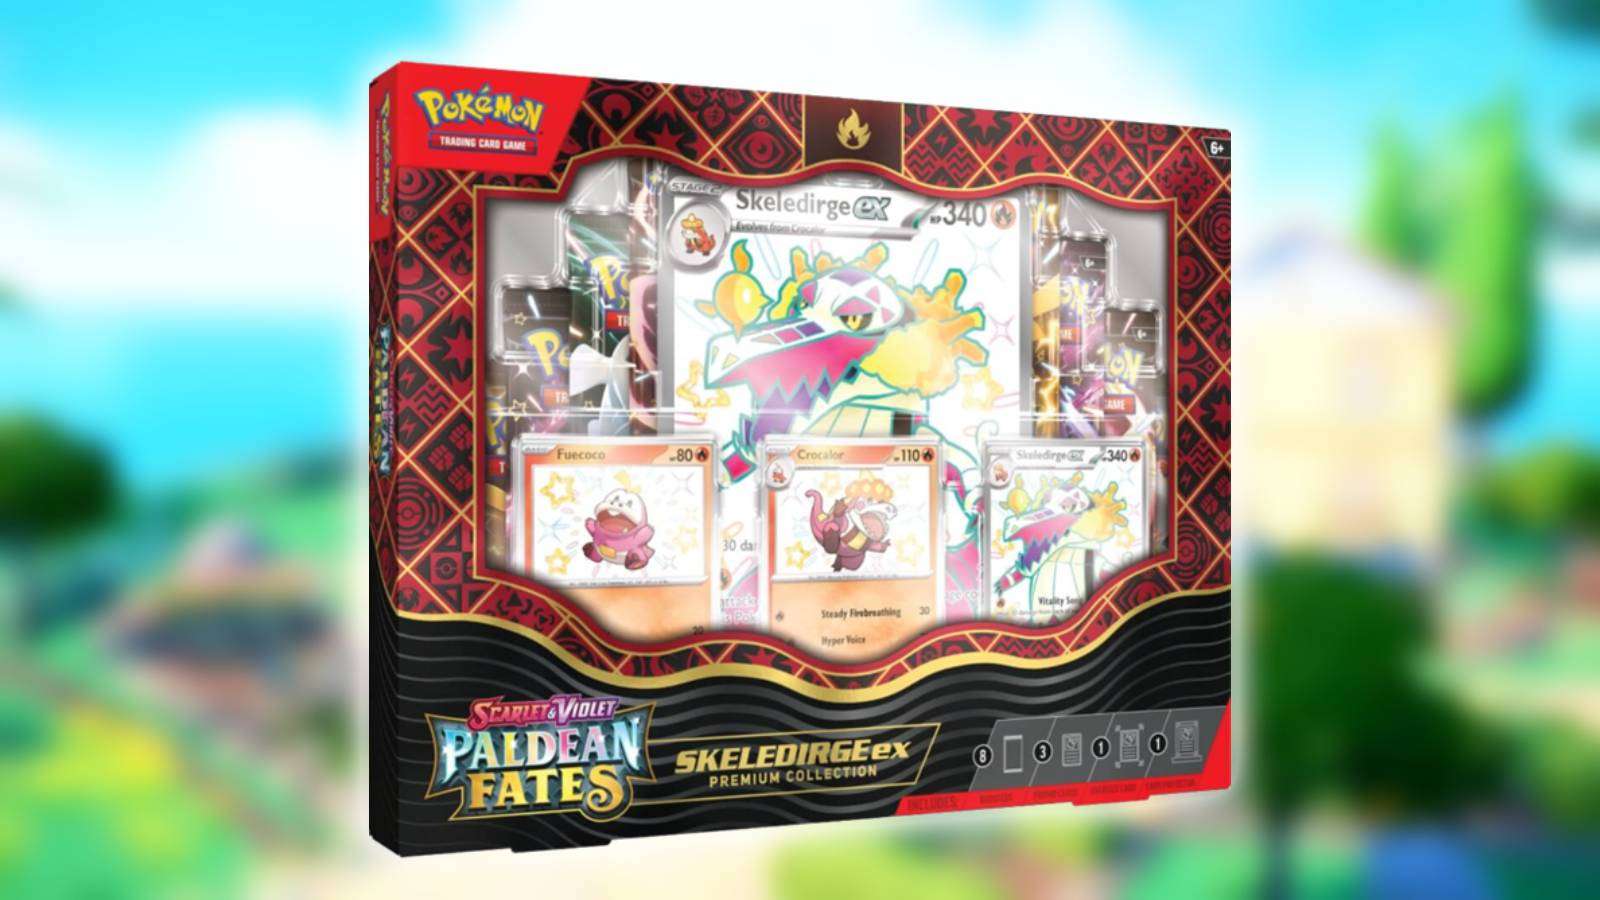 The Pokemon TCG Paldean Fates Premium Collection appears against a blurred background